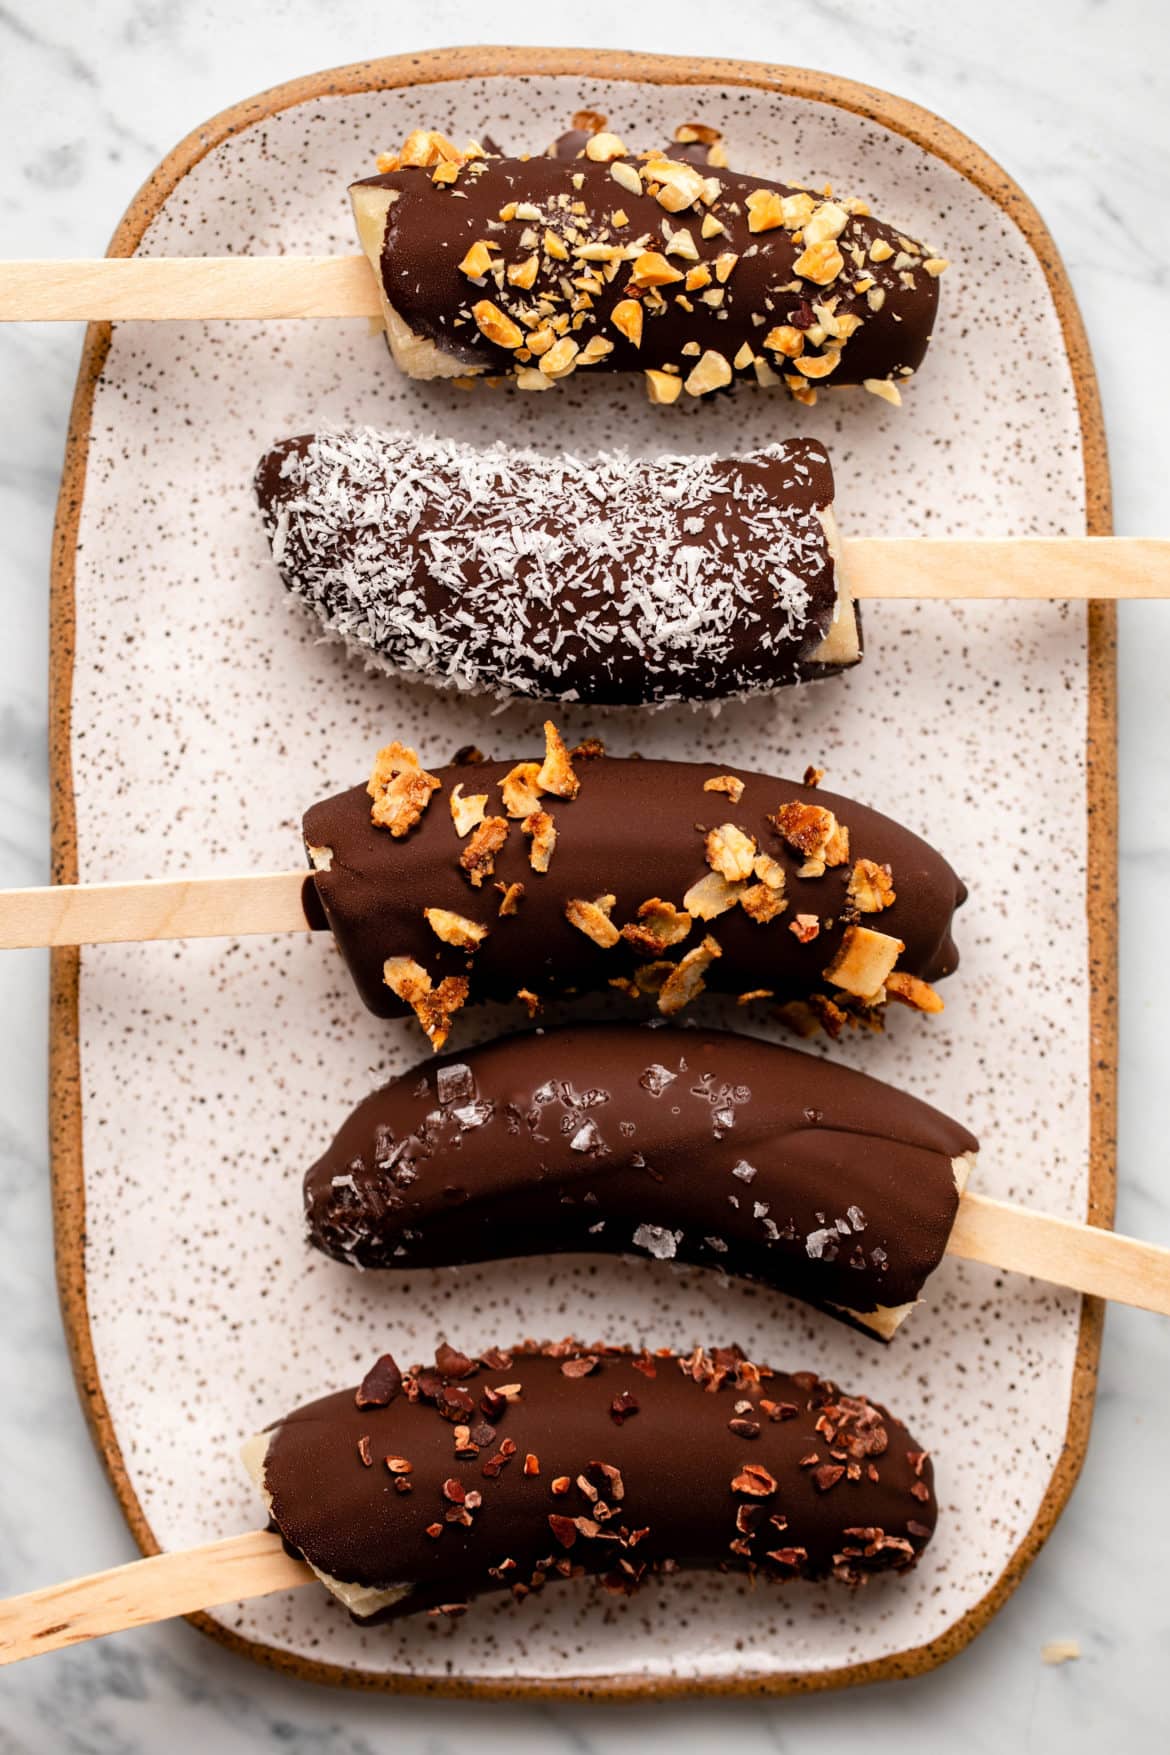 Chocolate Covered Banana Pops | Healthy 3-Ingredient Dessert! - From My ...